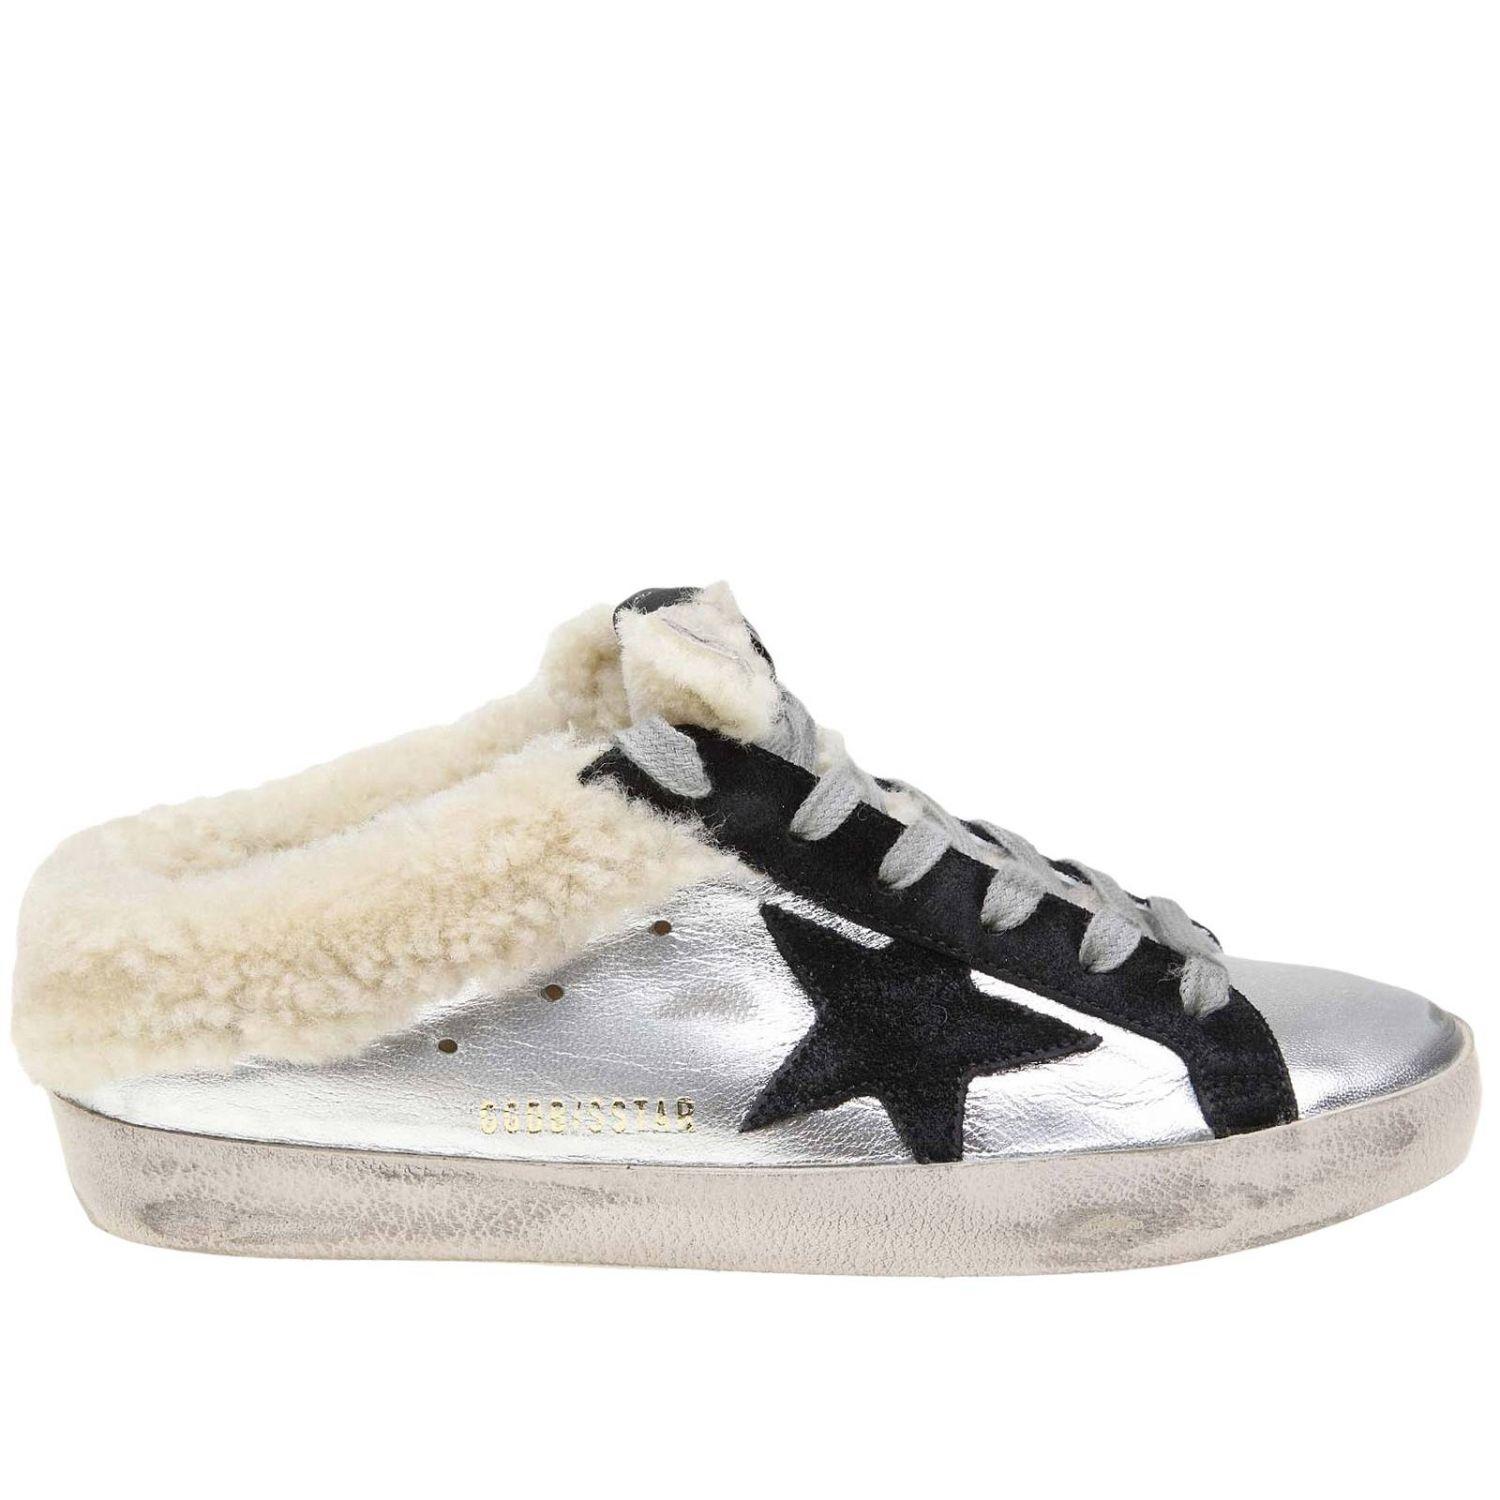 Golden Goose Deluxe Brand Sabot Superstar Sneakers In Laminated Leather ...